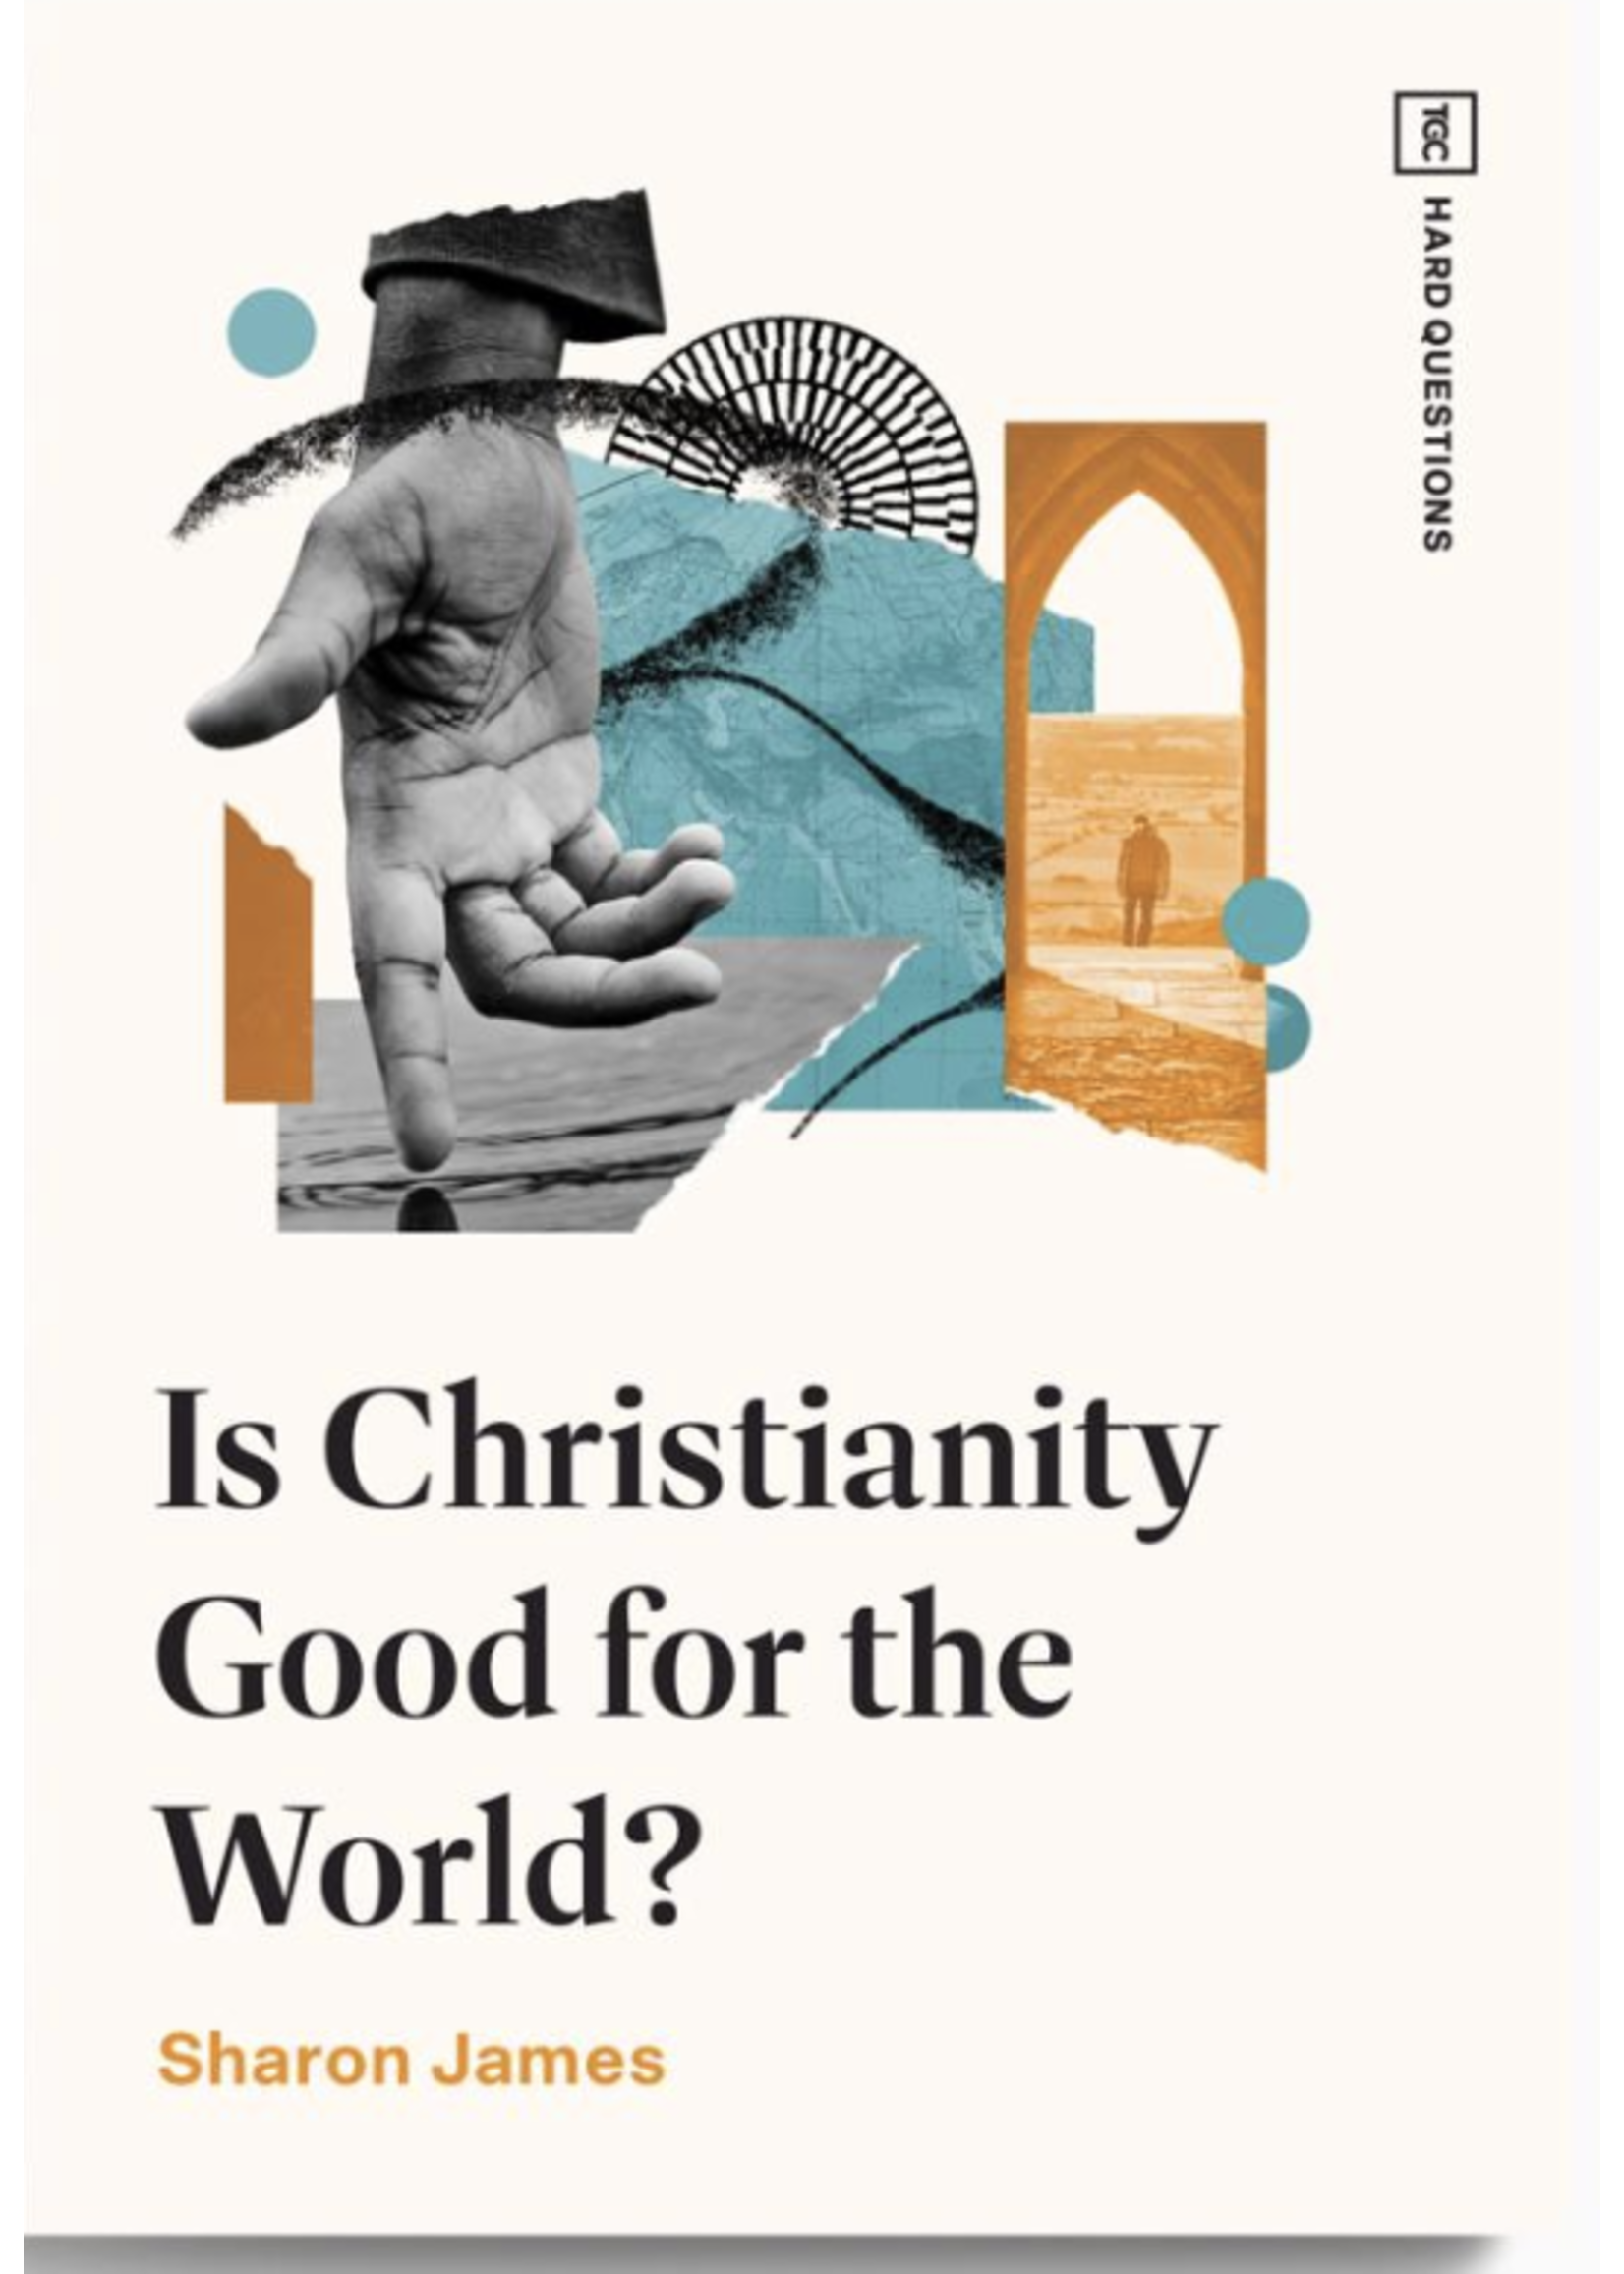 Is Christianity Good for the World? [Sharon James]